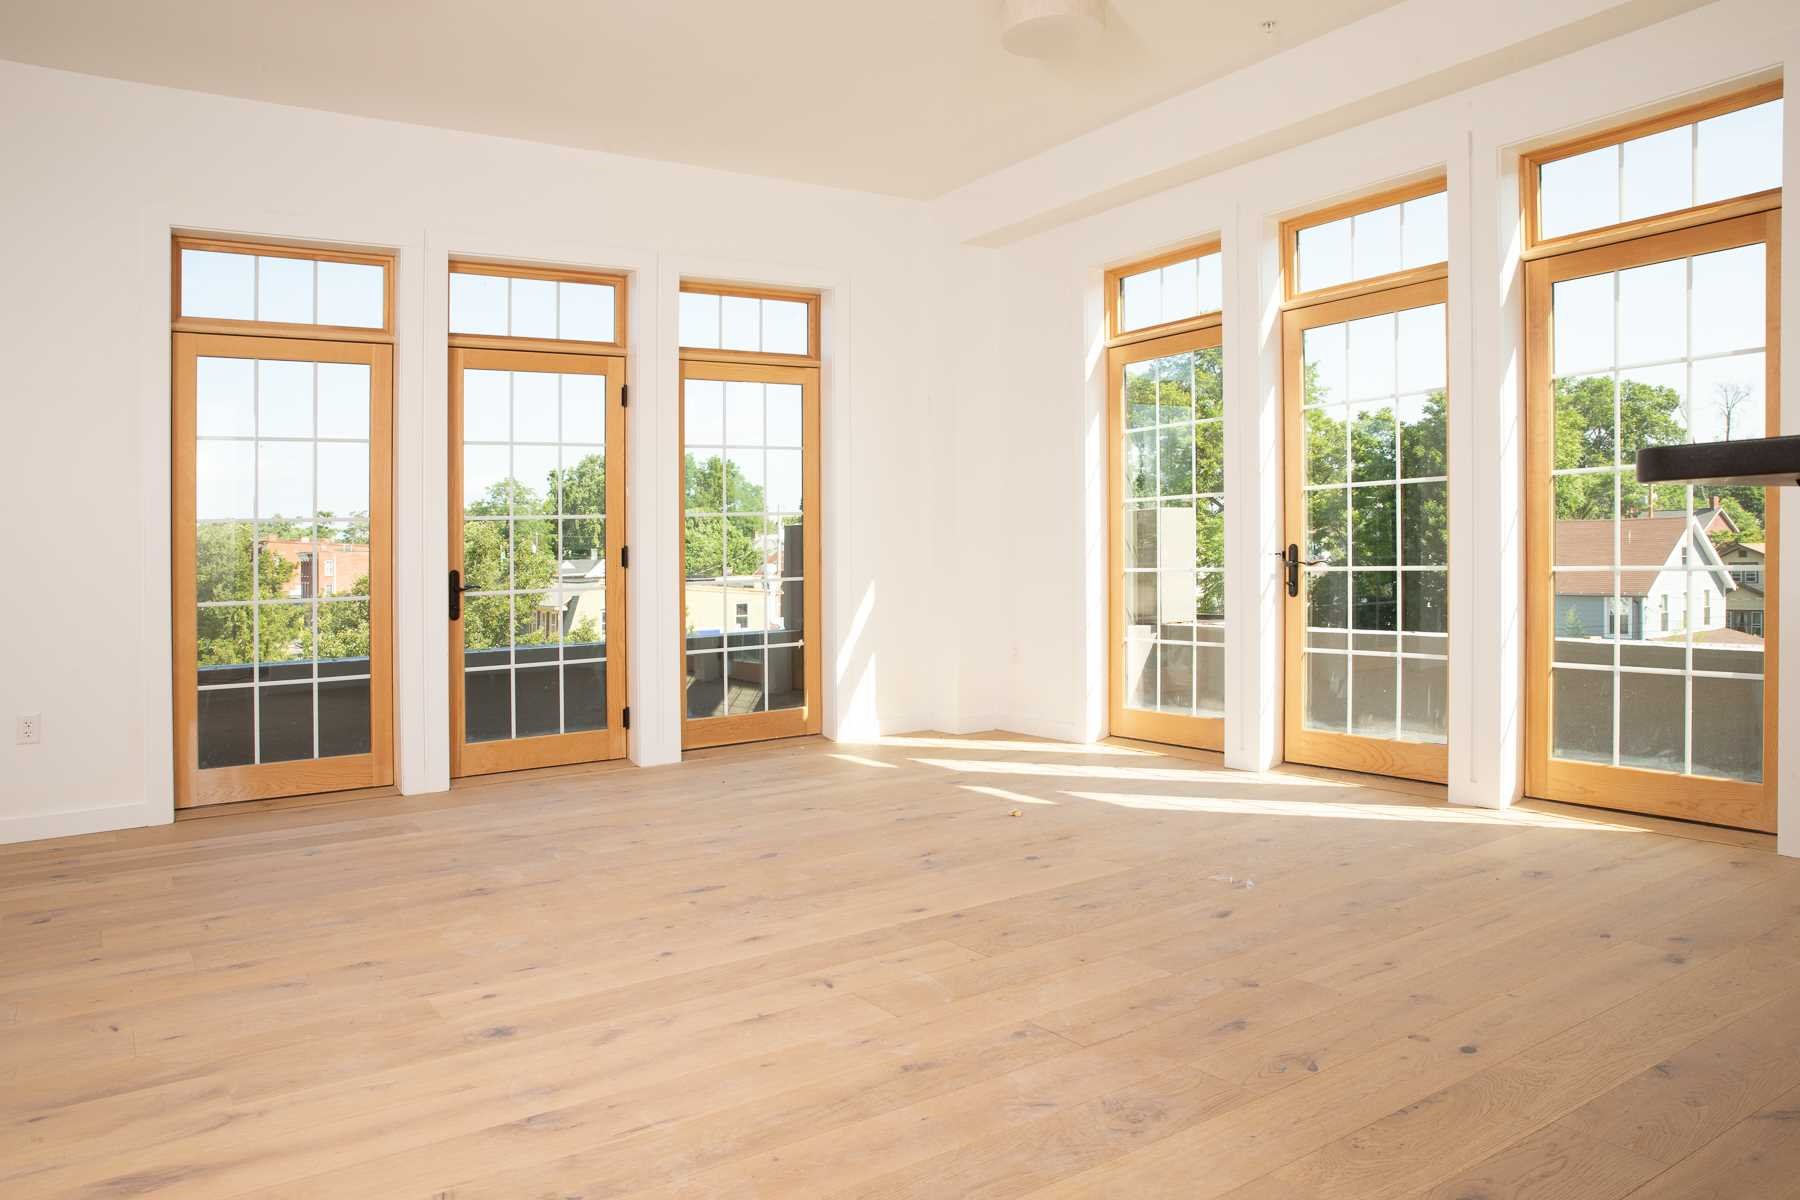 a view of an empty room with a large windows